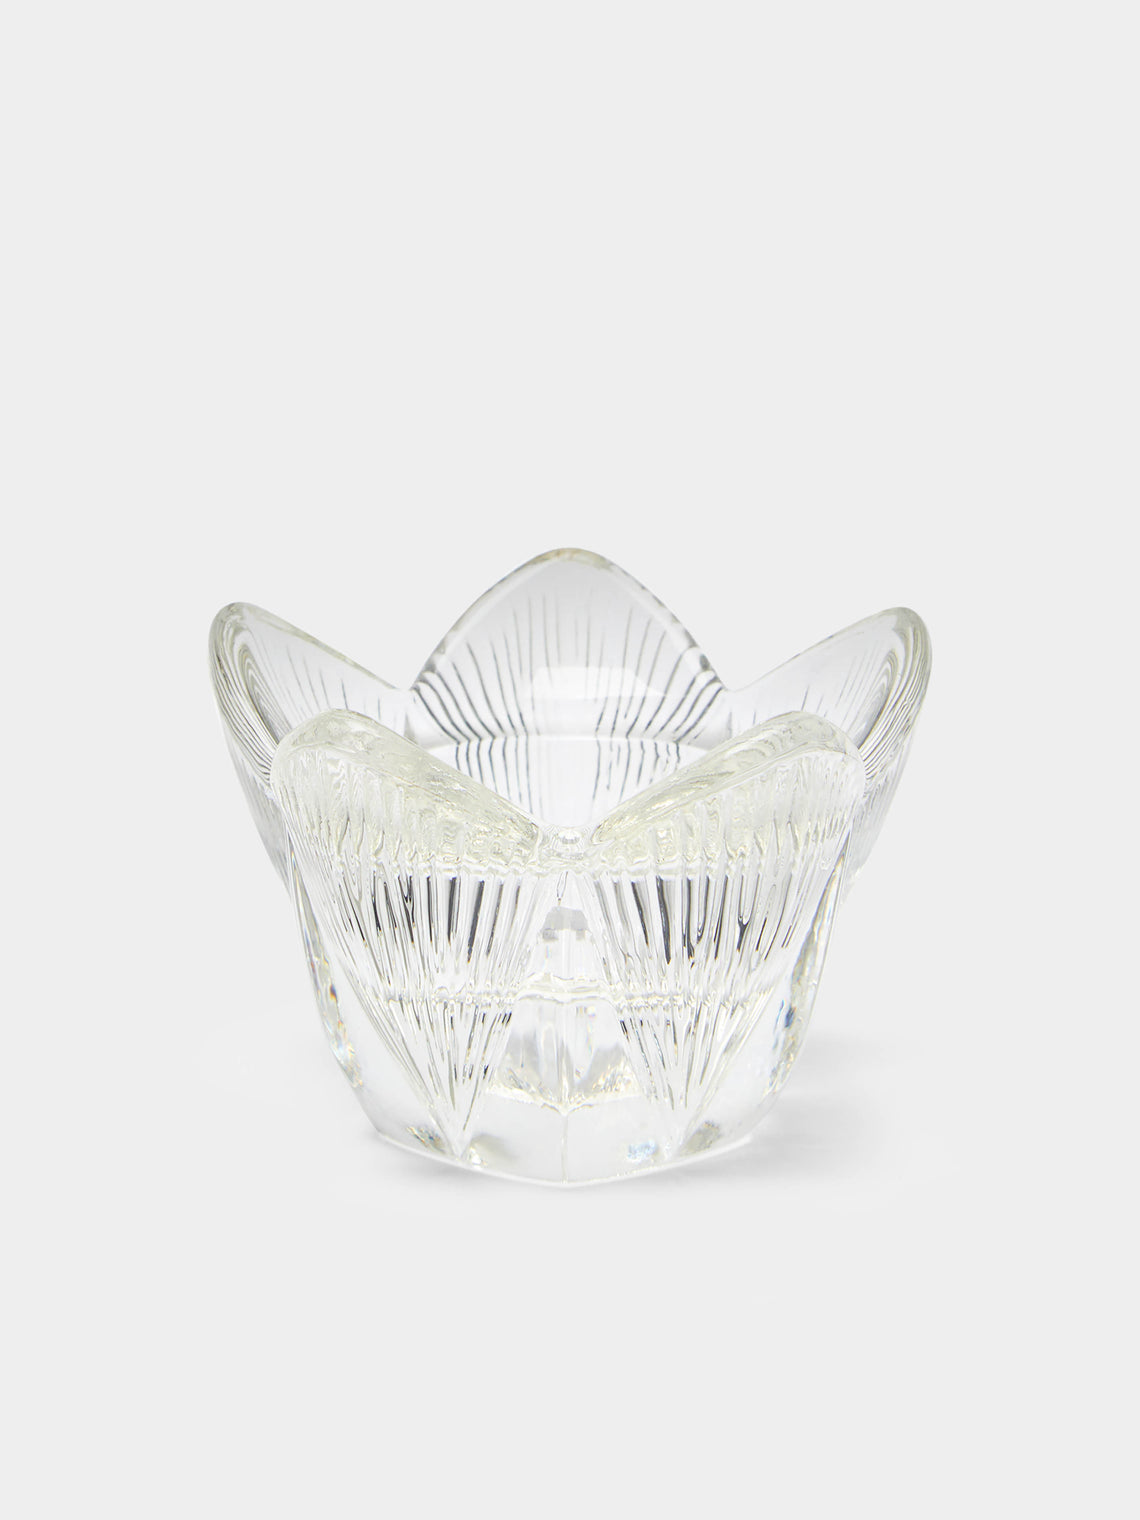 Antique and Vintage - 1930s Daum Flower Crystal Candle Holders (Set of 2) -  - ABASK - 